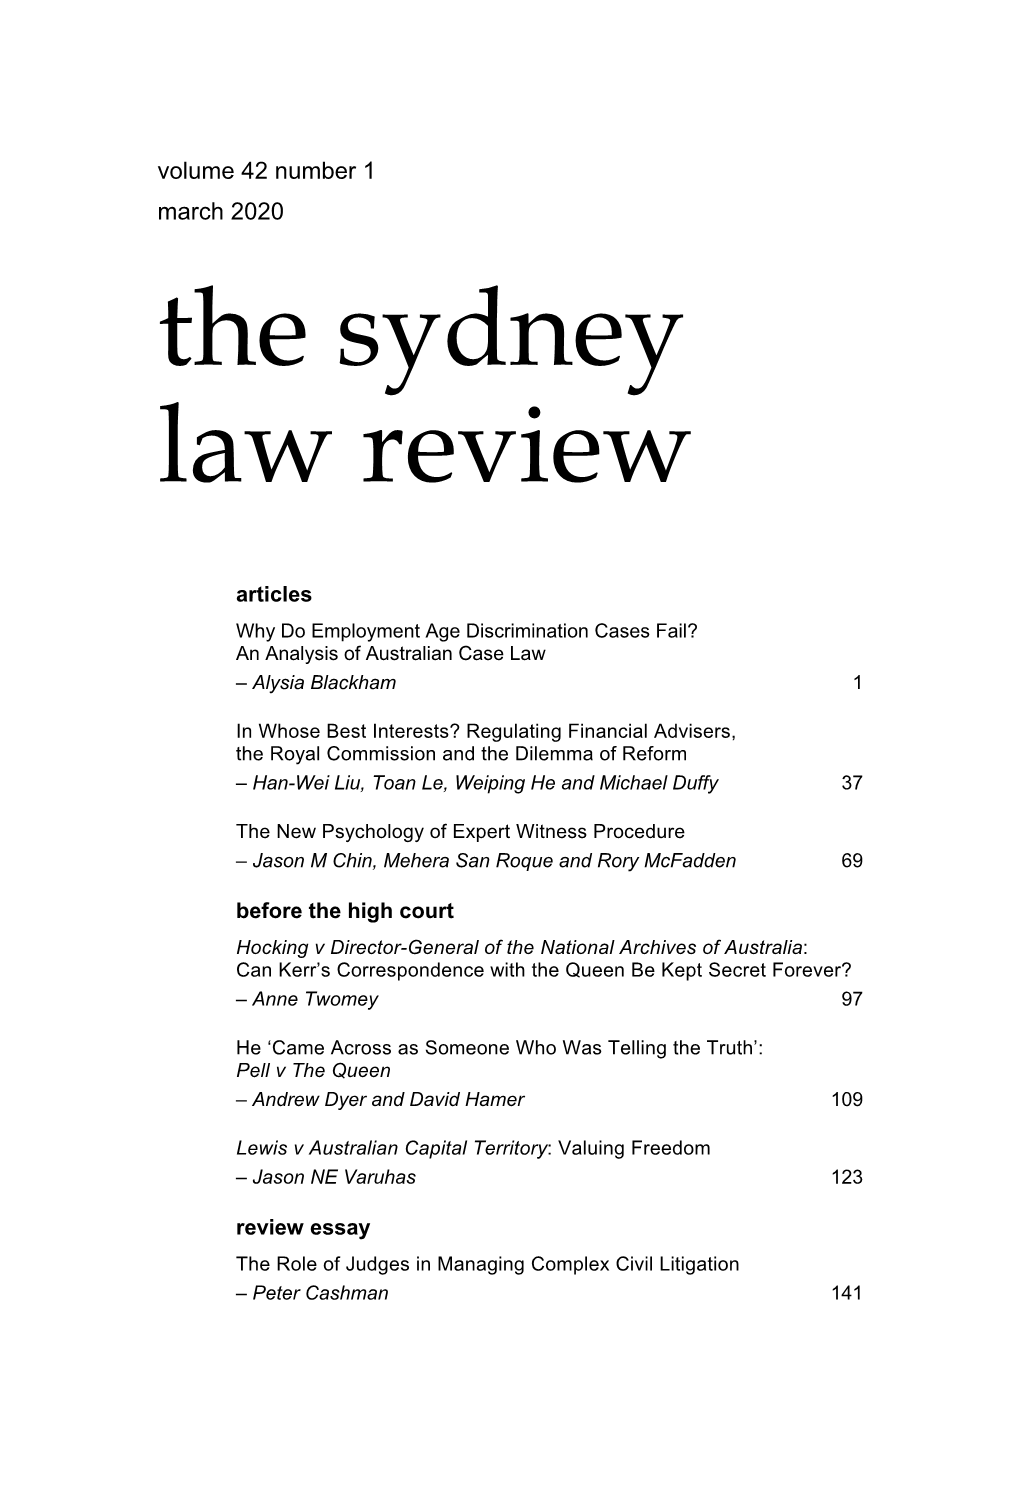 The Sydney Law Review